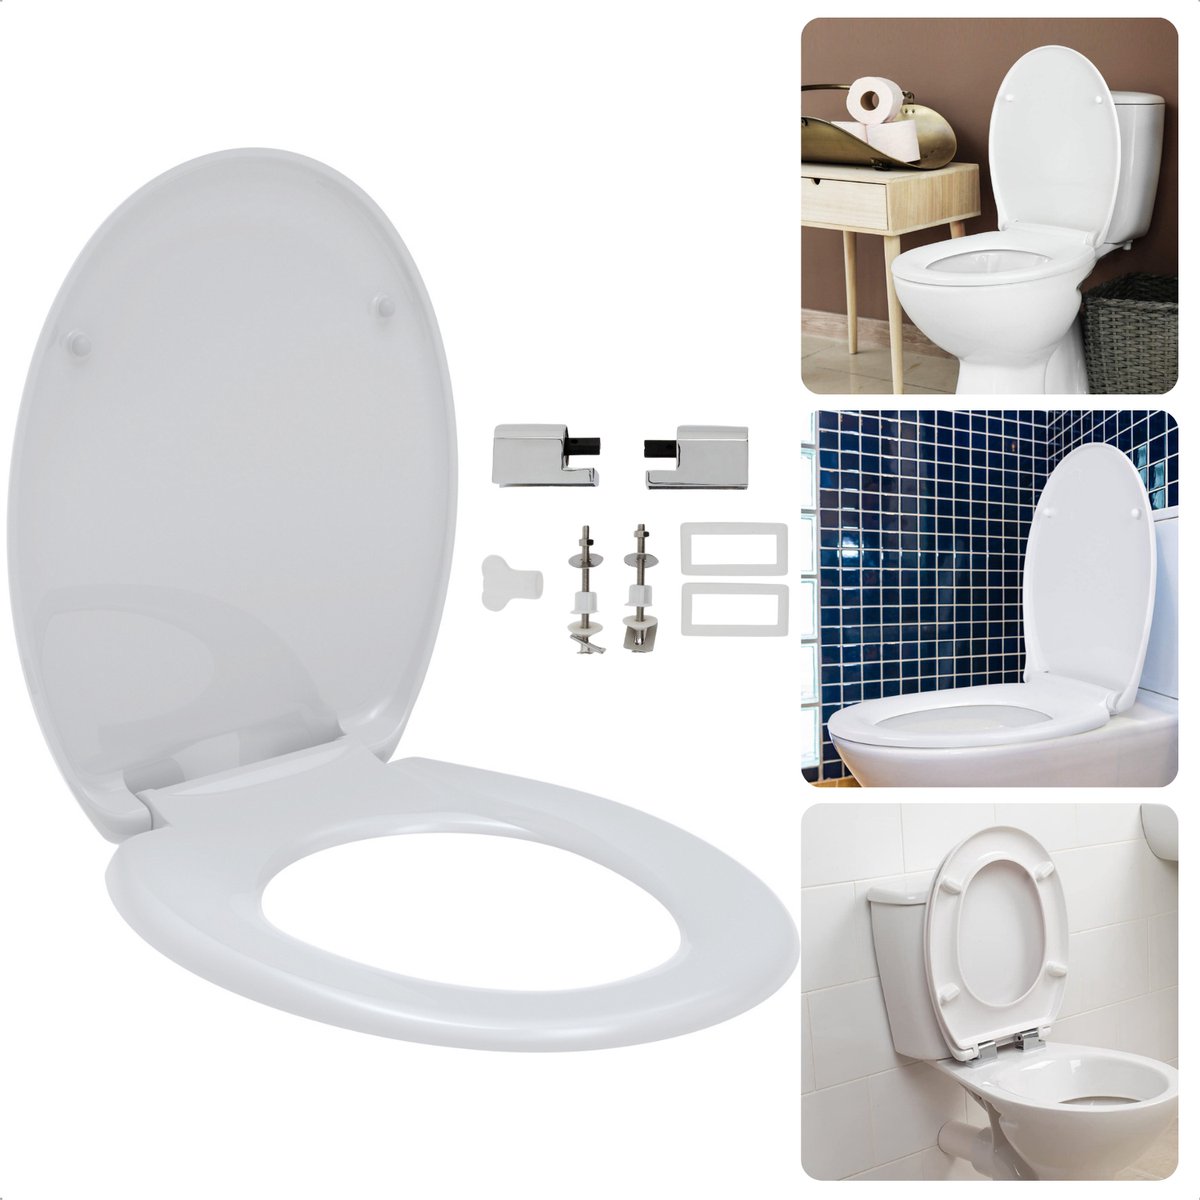 Cheqo® Toiletbril Duroplast - WC Bril - 45 x 38 cm - 18 Inch - Wit - Verbinding ABS - Softclose